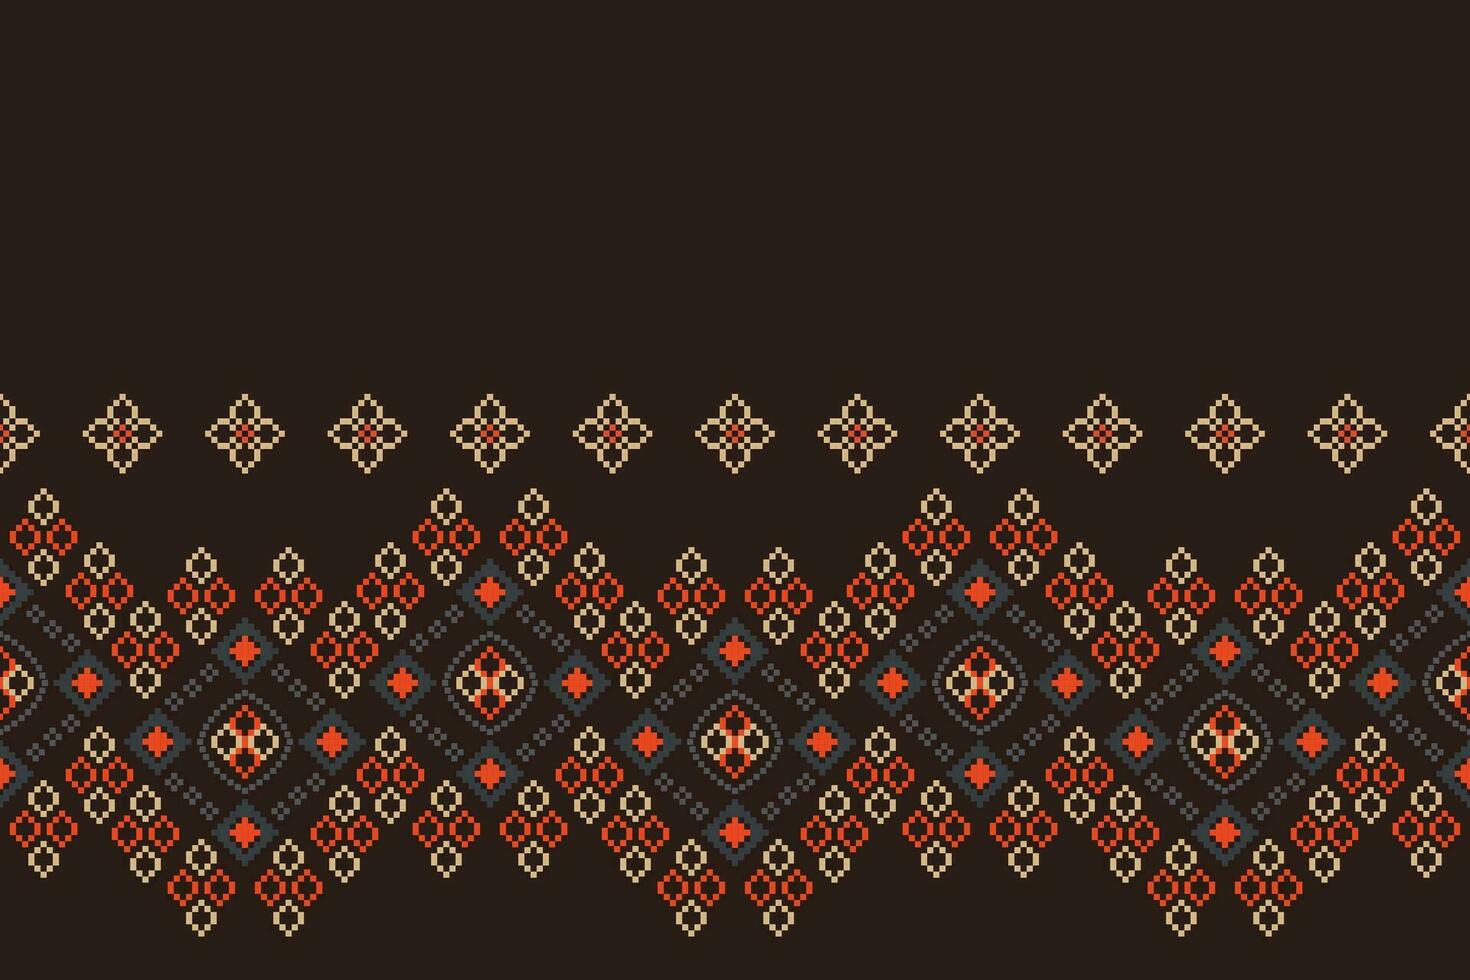 Ethnic geometric fabric pattern Cross Stitch.Ikat embroidery Ethnic oriental Pixel pattern brown background. Abstract,vector,illustration. Texture,clothing,scarf,decoration,carpet,silk wallpaper. vector